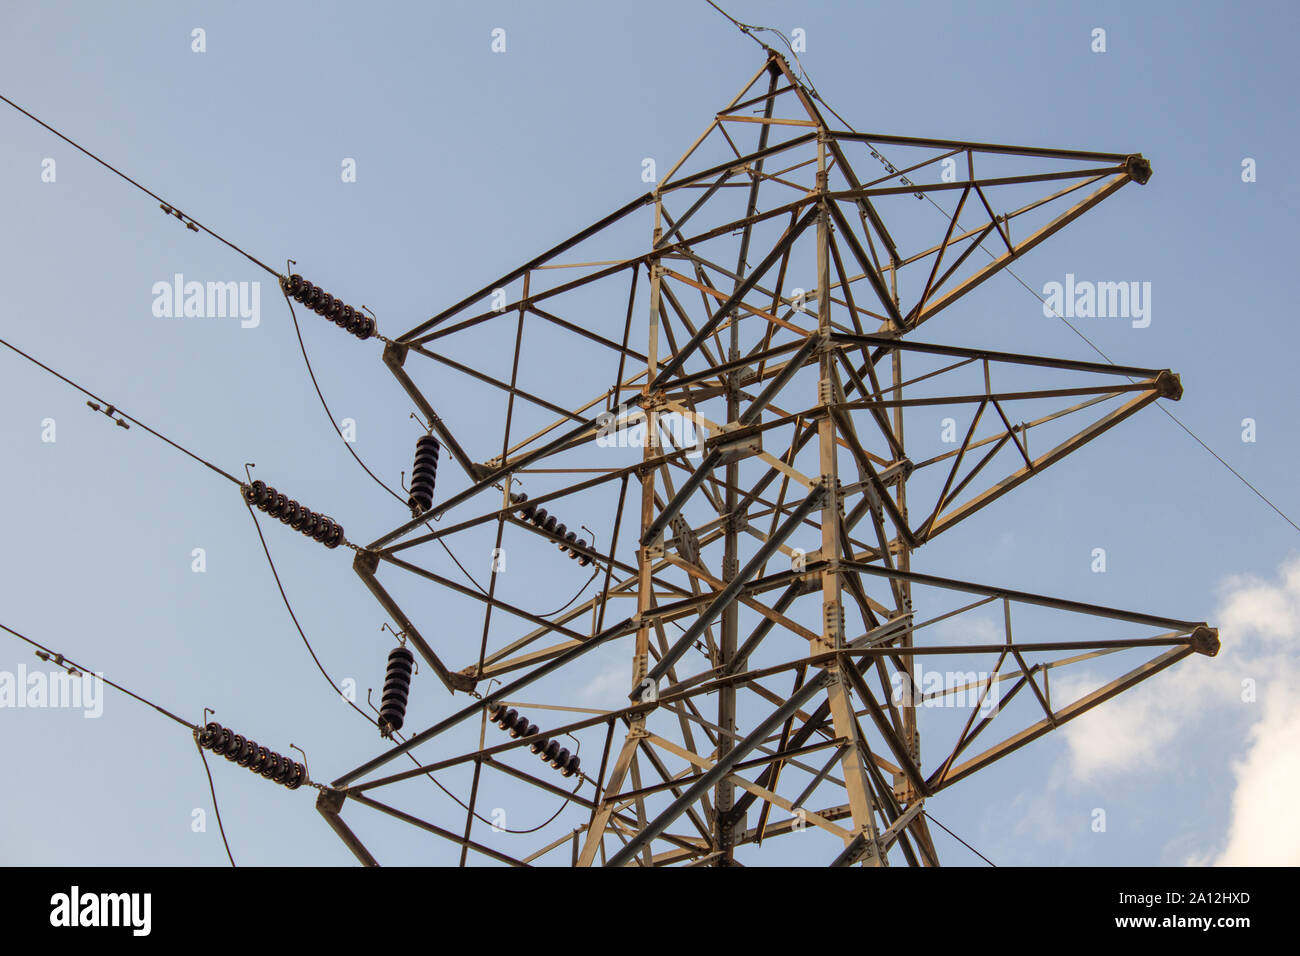 High voltage electricity poles used for power transmission Stock Photo